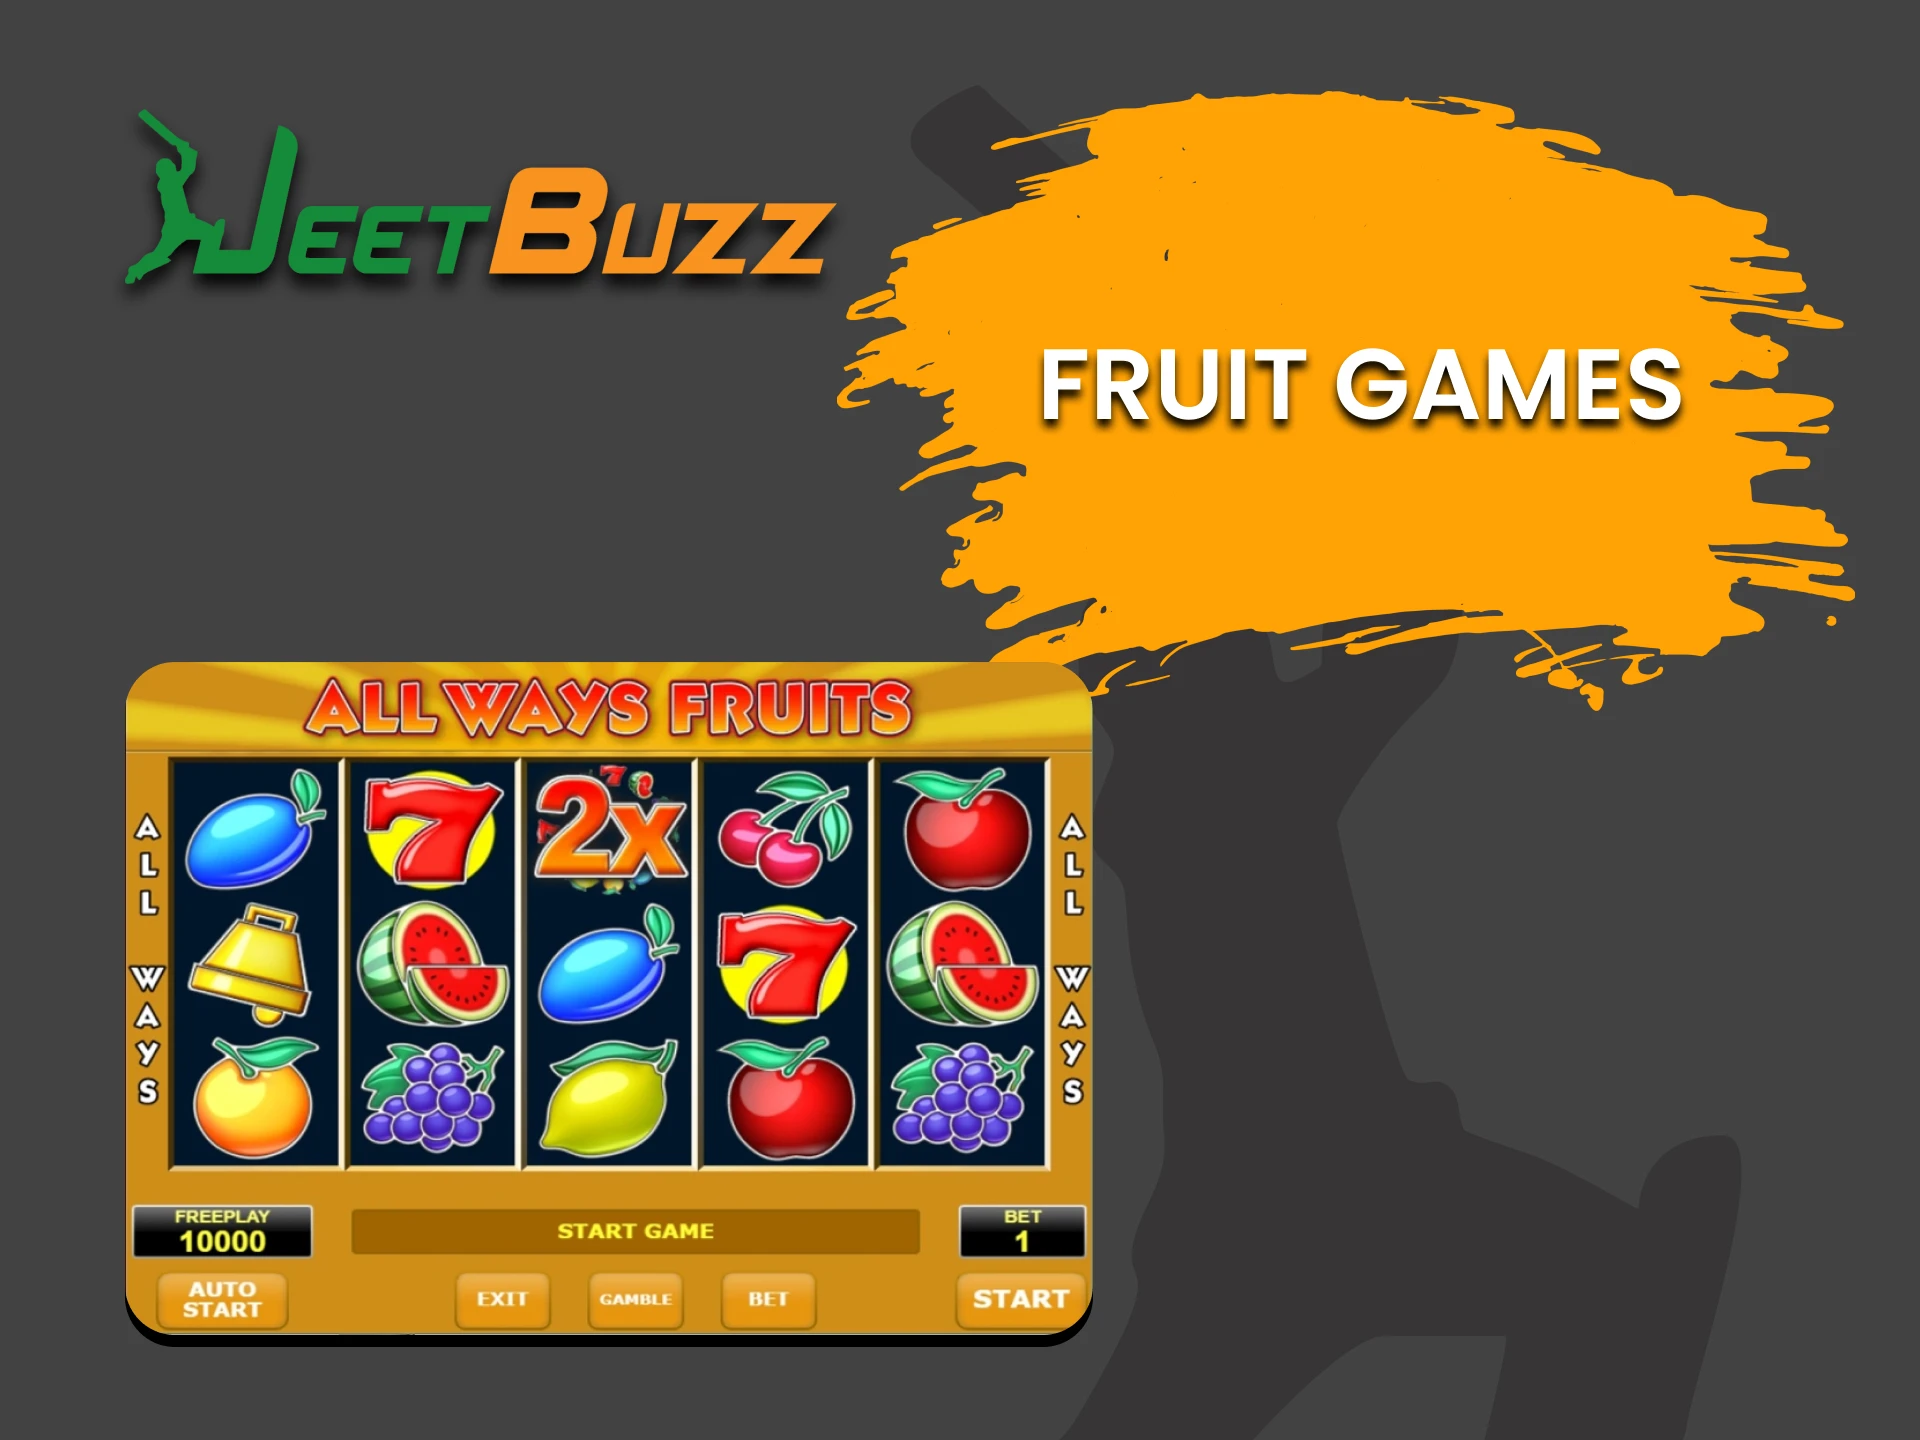 After selecting the Arcade section of JeetBuzz, try playing Fruit Games.